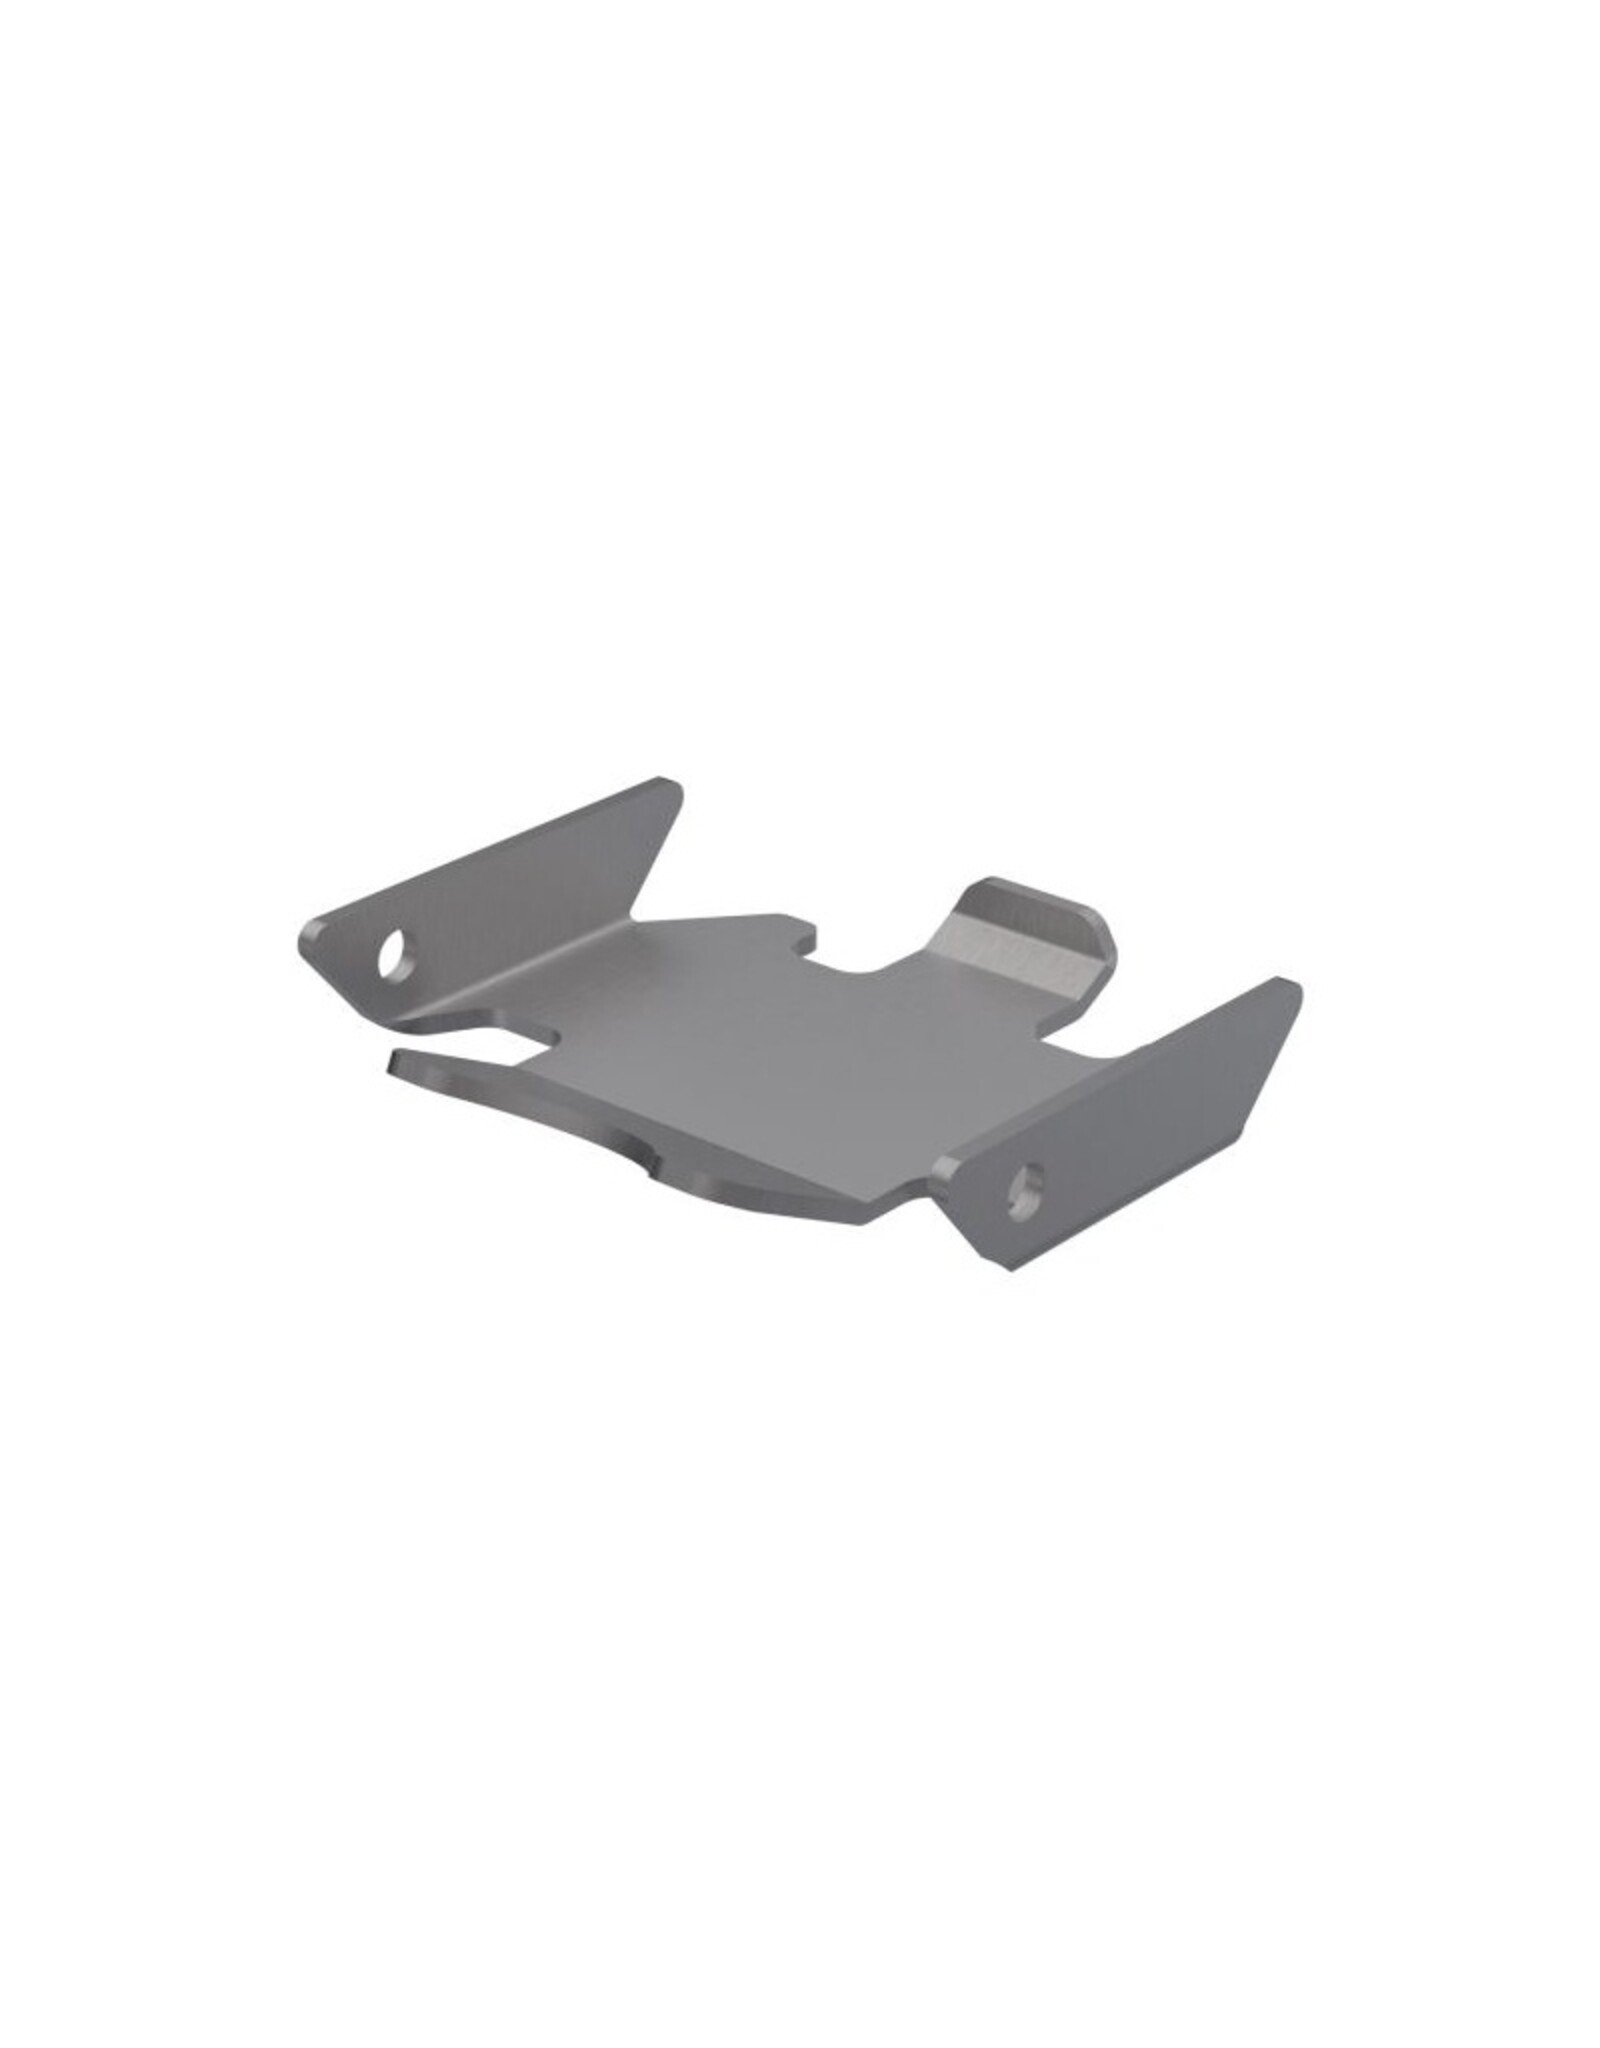 Traxxas TRA9766 SKIDPLATE CHASSIS STAINLESS